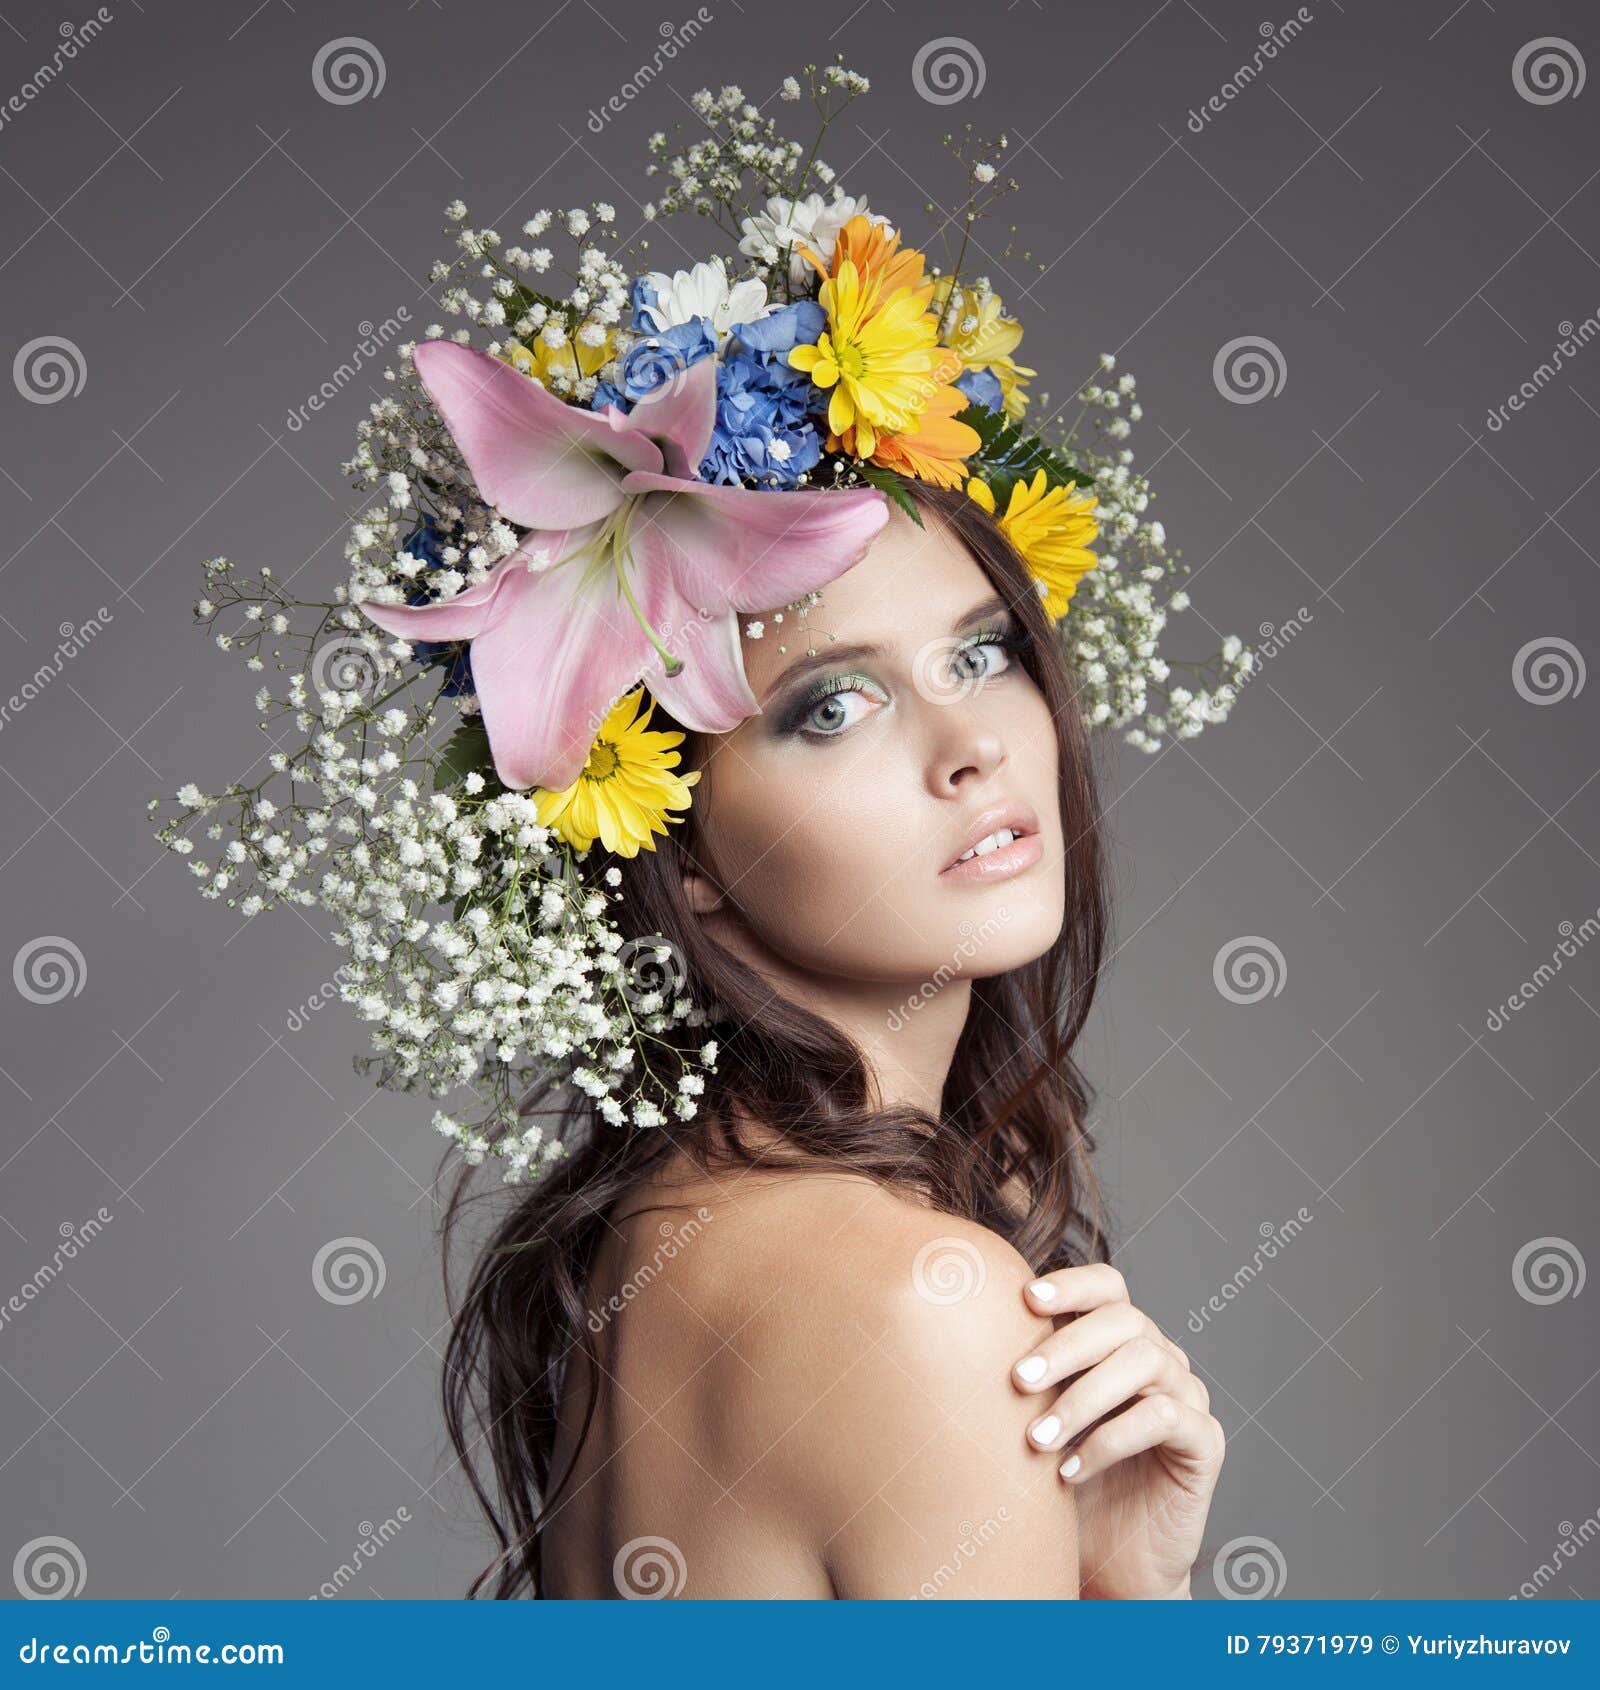 Beautiful Woman with Flower Wreath on Her Head. Stock Image - Image of ...